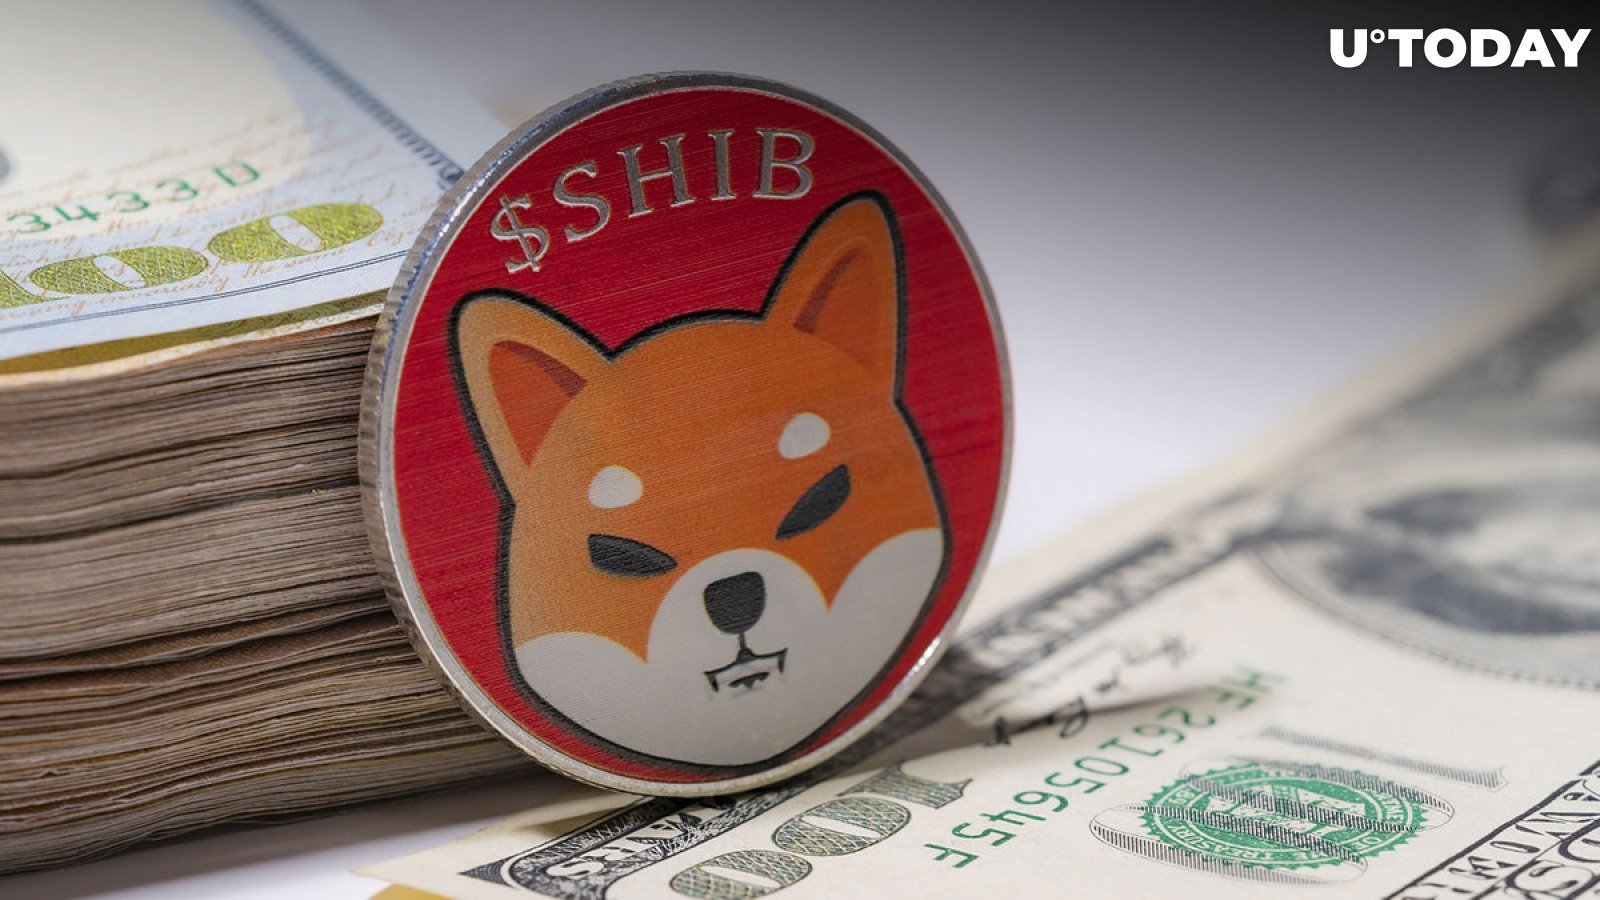 $2.5 Million in SHIB Unloaded by Major Holder, But Shiba Inu Price Acts Paradoxically